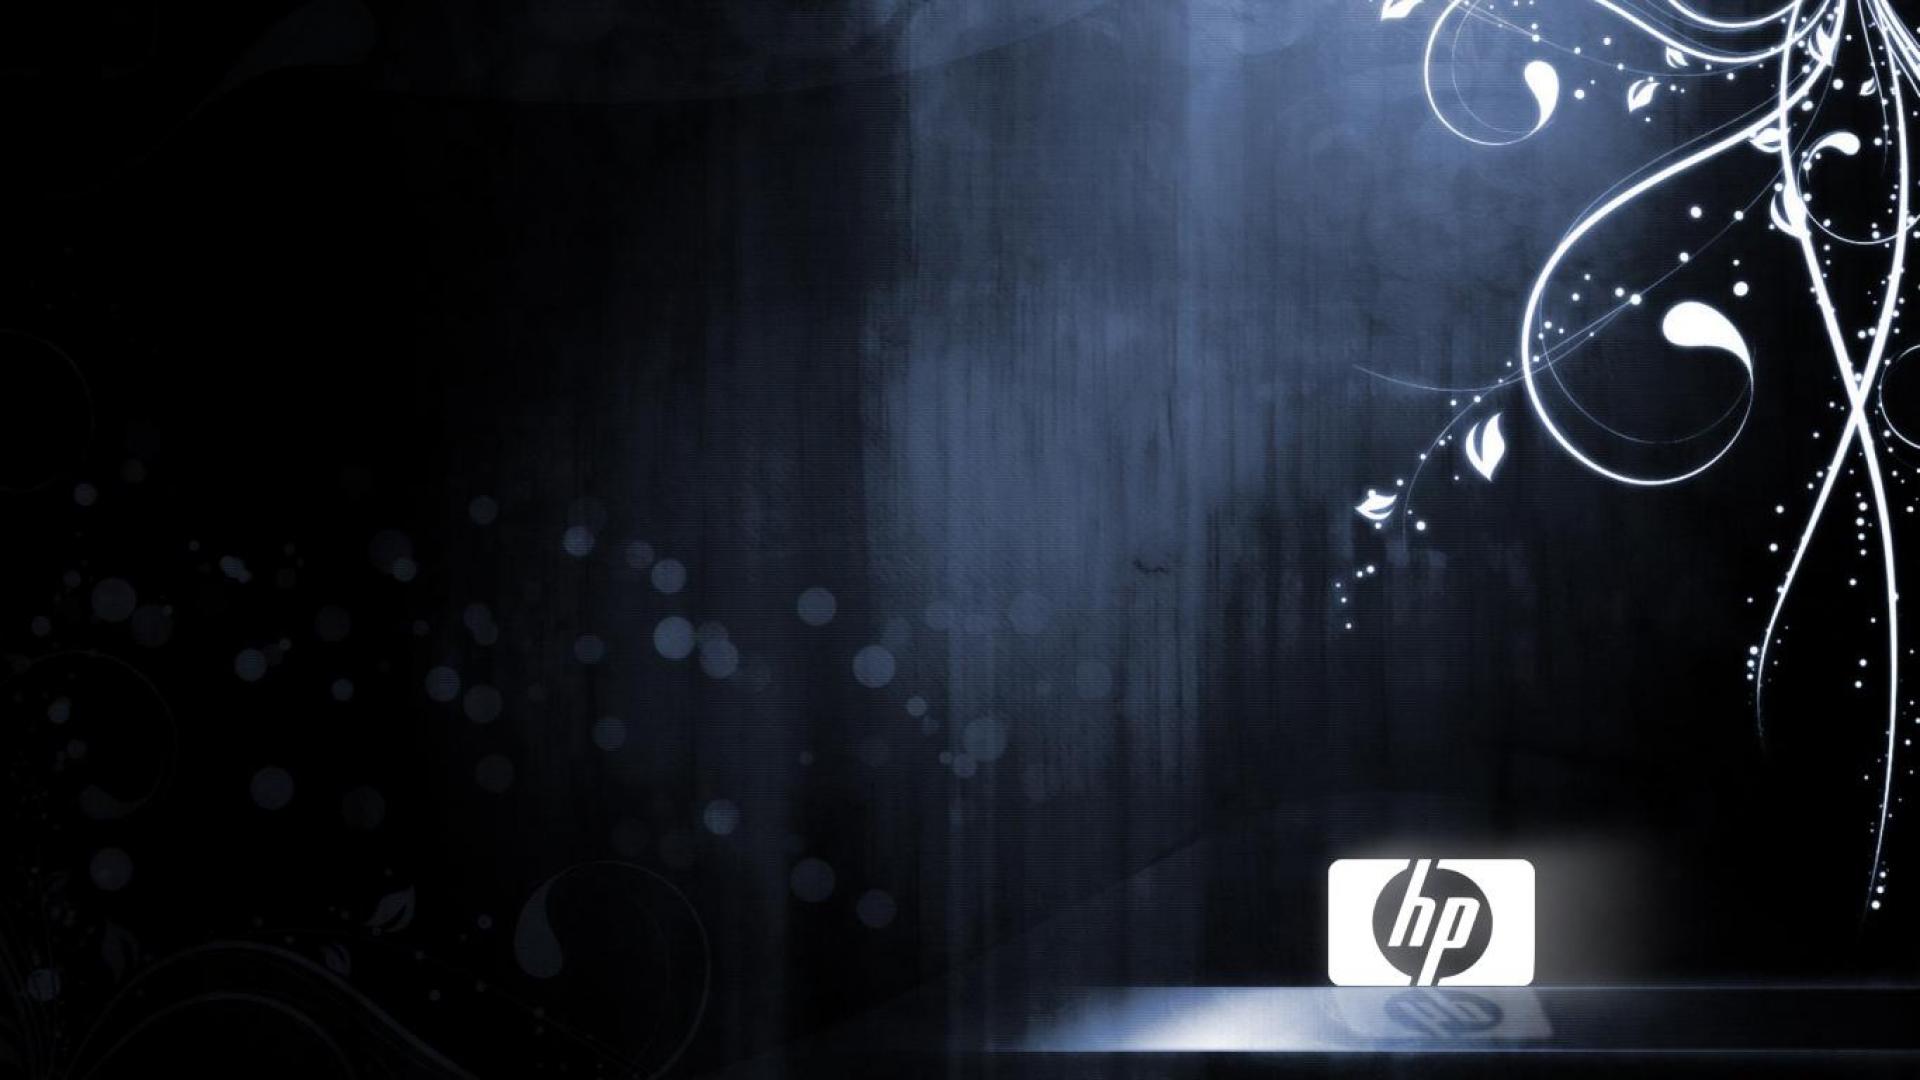 Hp   86967   High Quality and Resolution Wallpapers on hqwallbase